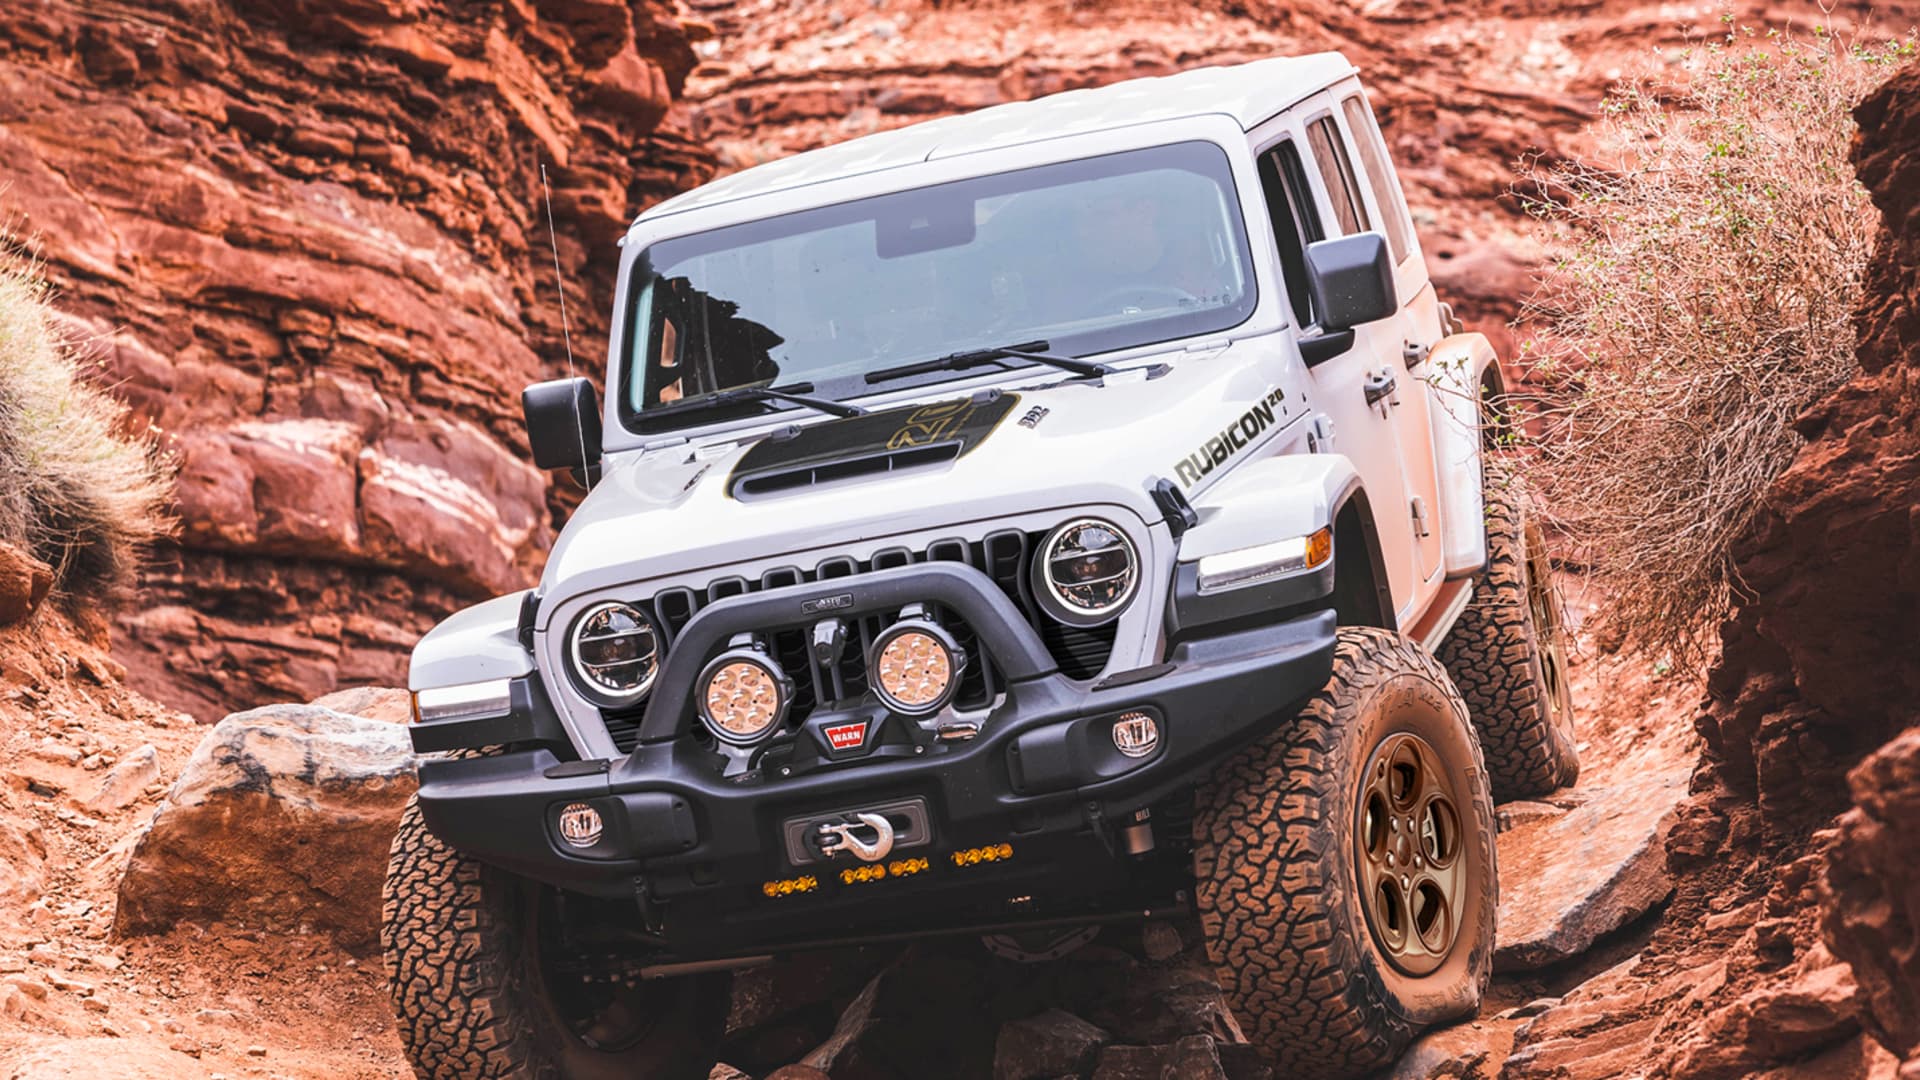 Jeep reveals its most expensive Wrangler SUV ever, topping $115,000